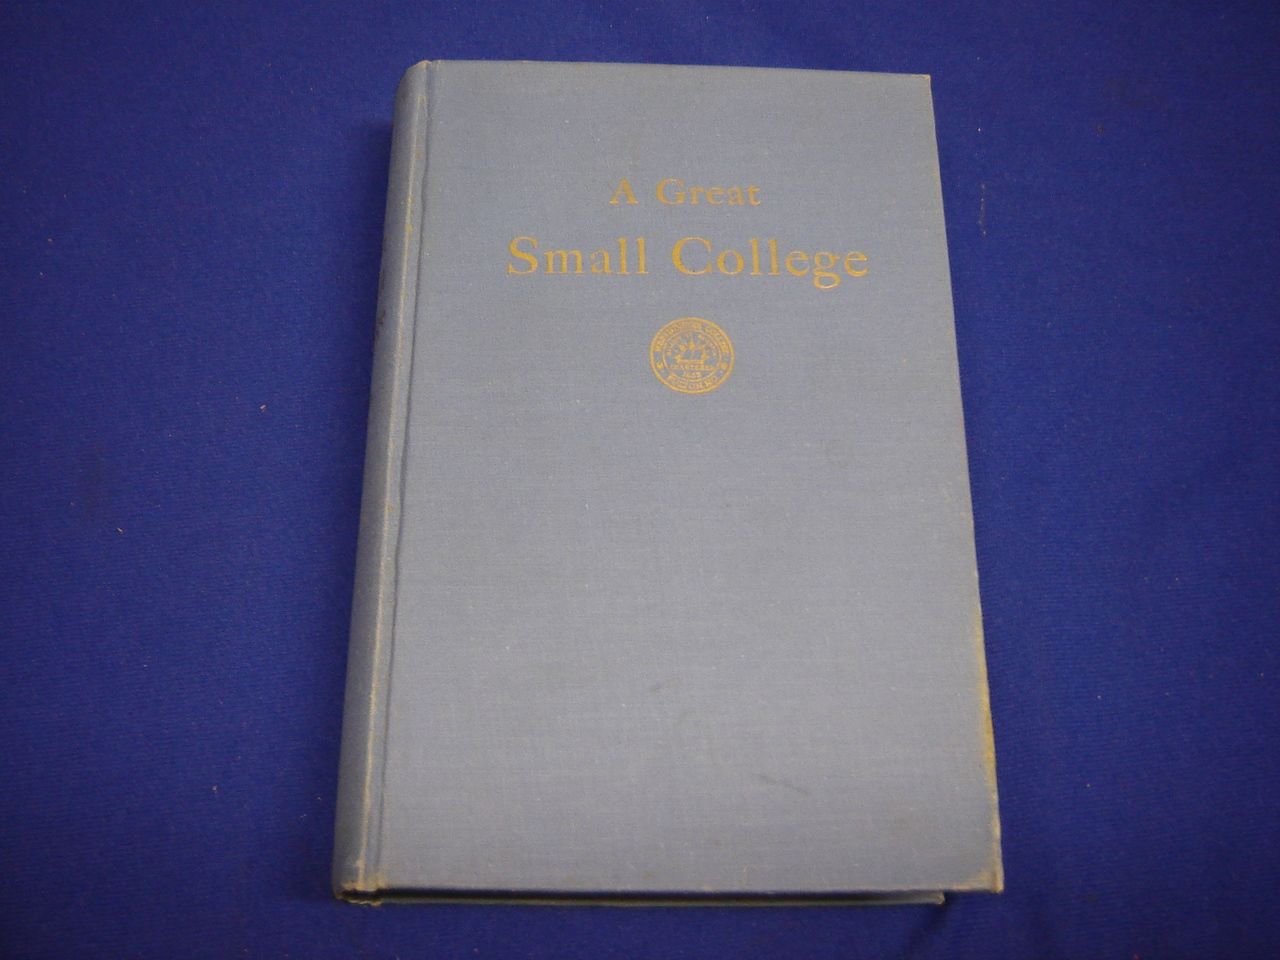 Great Small College   History of Westminster College Fulton Missouri 